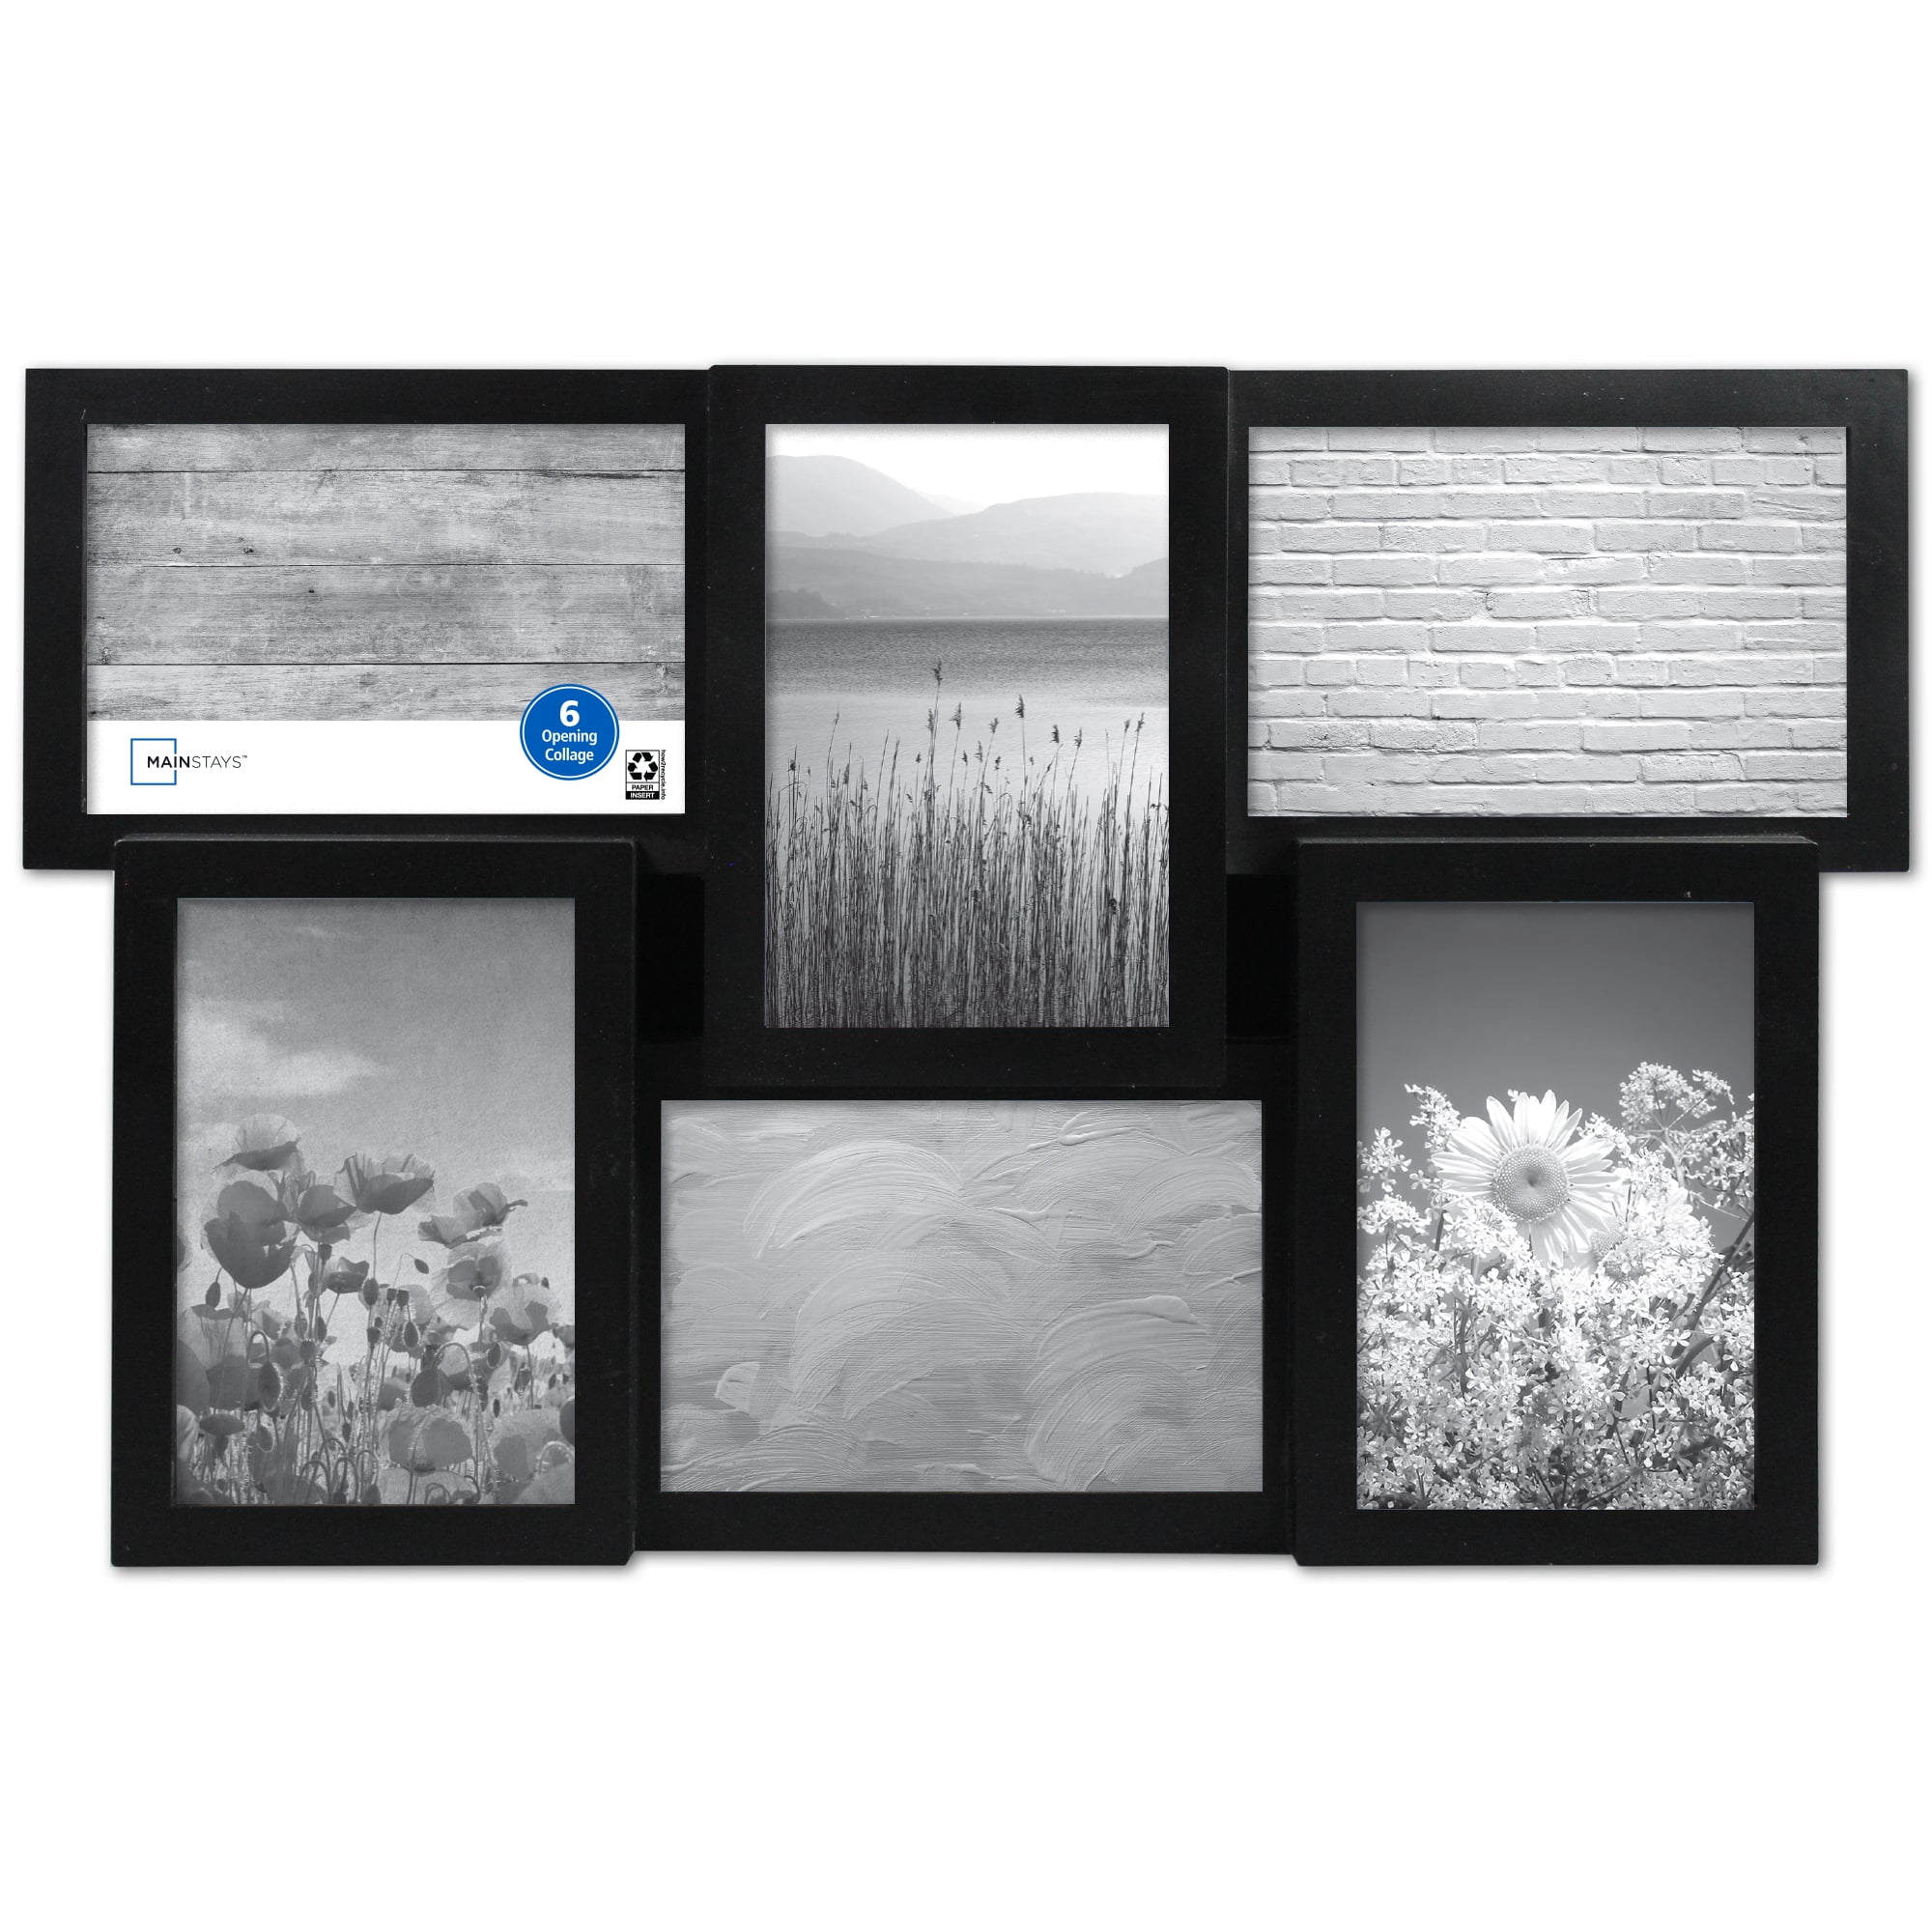 4 x 6 Matte Black Wood 6 Pack Picture Frames with Tempered Glass